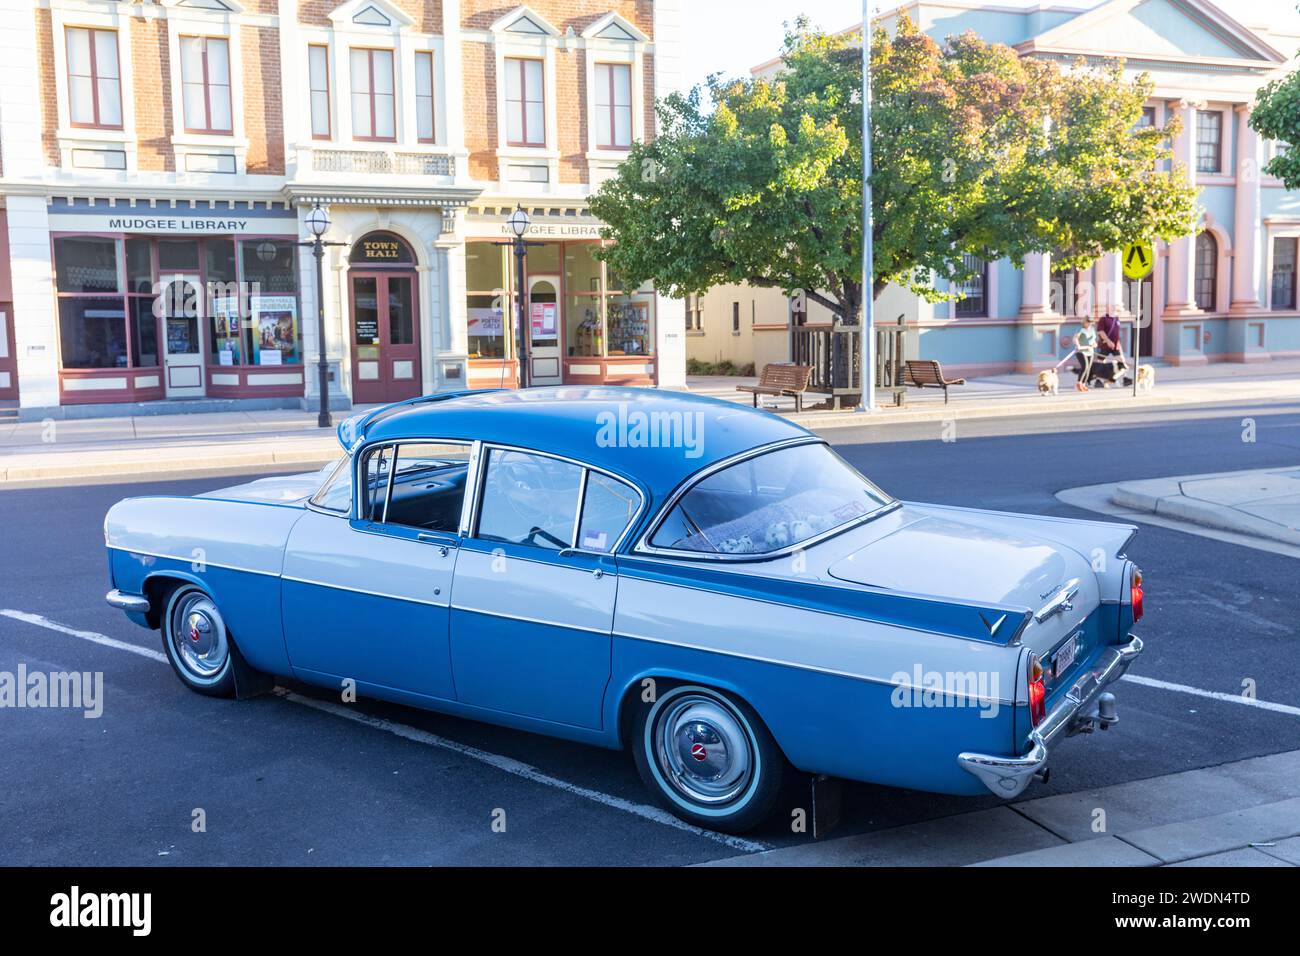 1961 Vauxhall Cresta saloon car or sedan, two tone blue and white, in Mudgee town centre ,New South Wales, Australia, 2024 Stock Photo